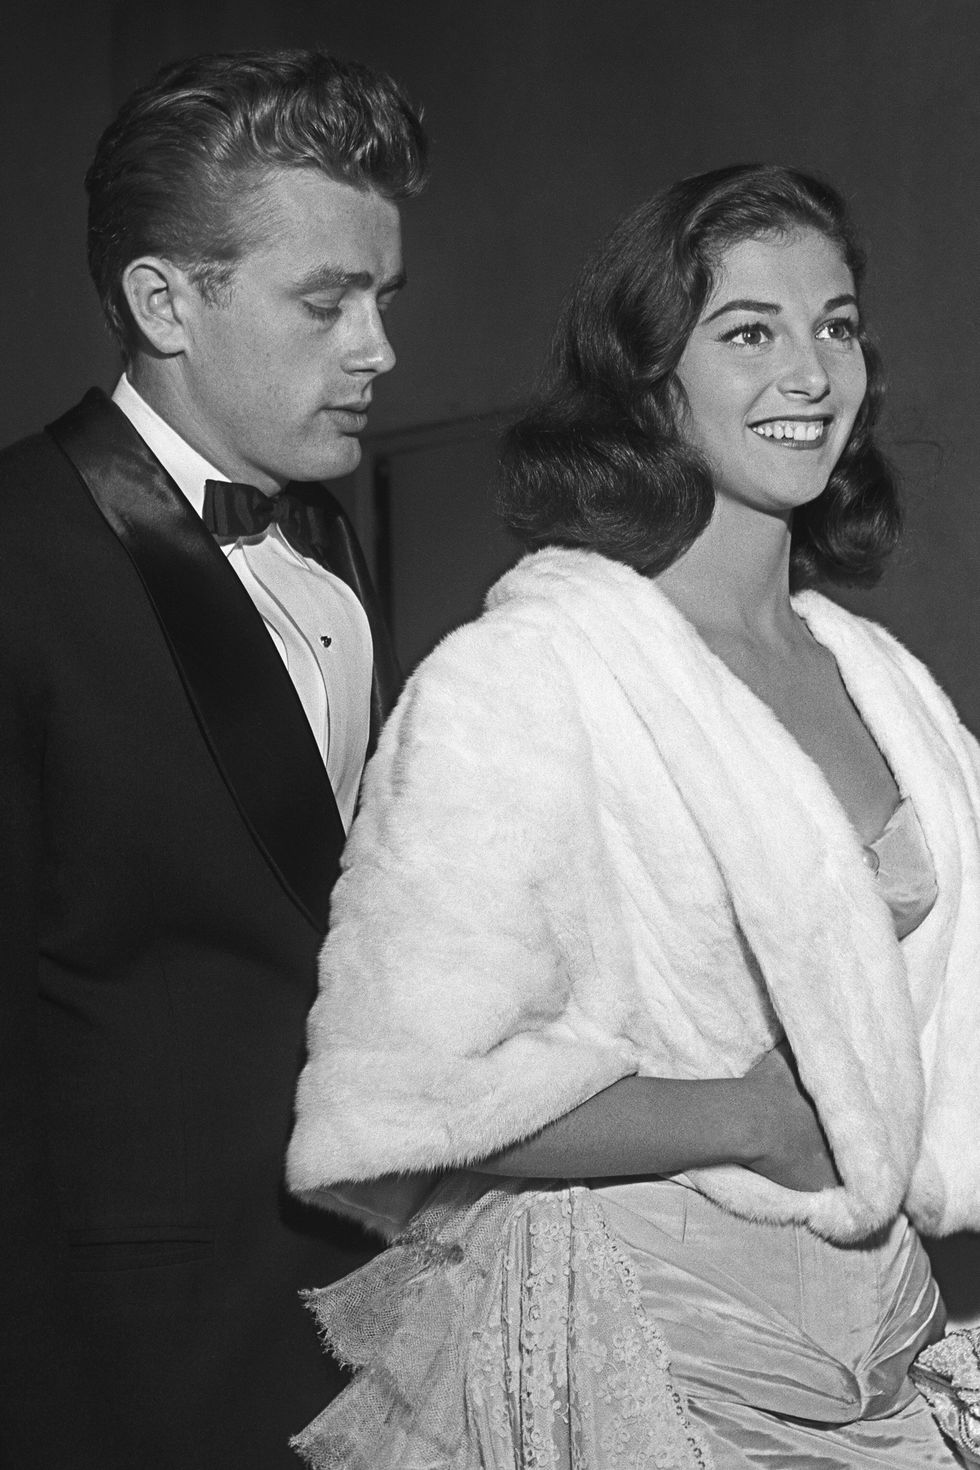 LOS ANGELES - AUGUST 10:  Movie star James Dean and Italian born actress Pier Angeli attend the premiere of the re-release of Gone With The Wind on August 10 1954 in Los Angeles, California. The Oscars won for the movie are in the background. (Photo by Michael Ochs Archive/Getty Images)